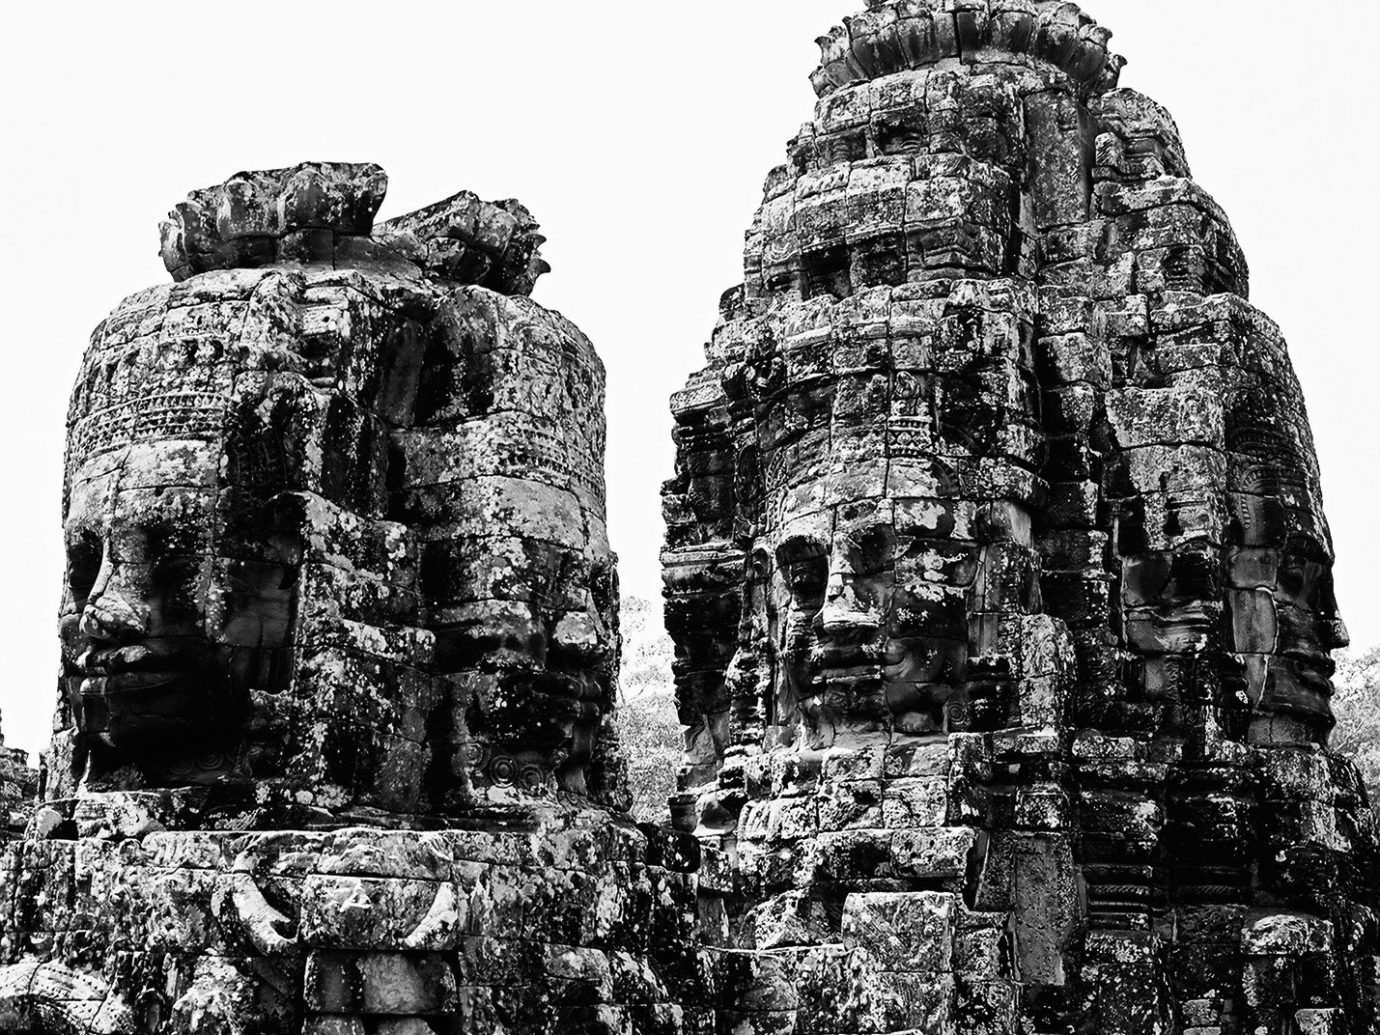 Offbeat tree black and white outdoor historic site archaeological site landmark stone carving hindu temple building monument monochrome photography rock Ruins statue monochrome ancient history place of worship temple maya civilization sculpture monolith old stone